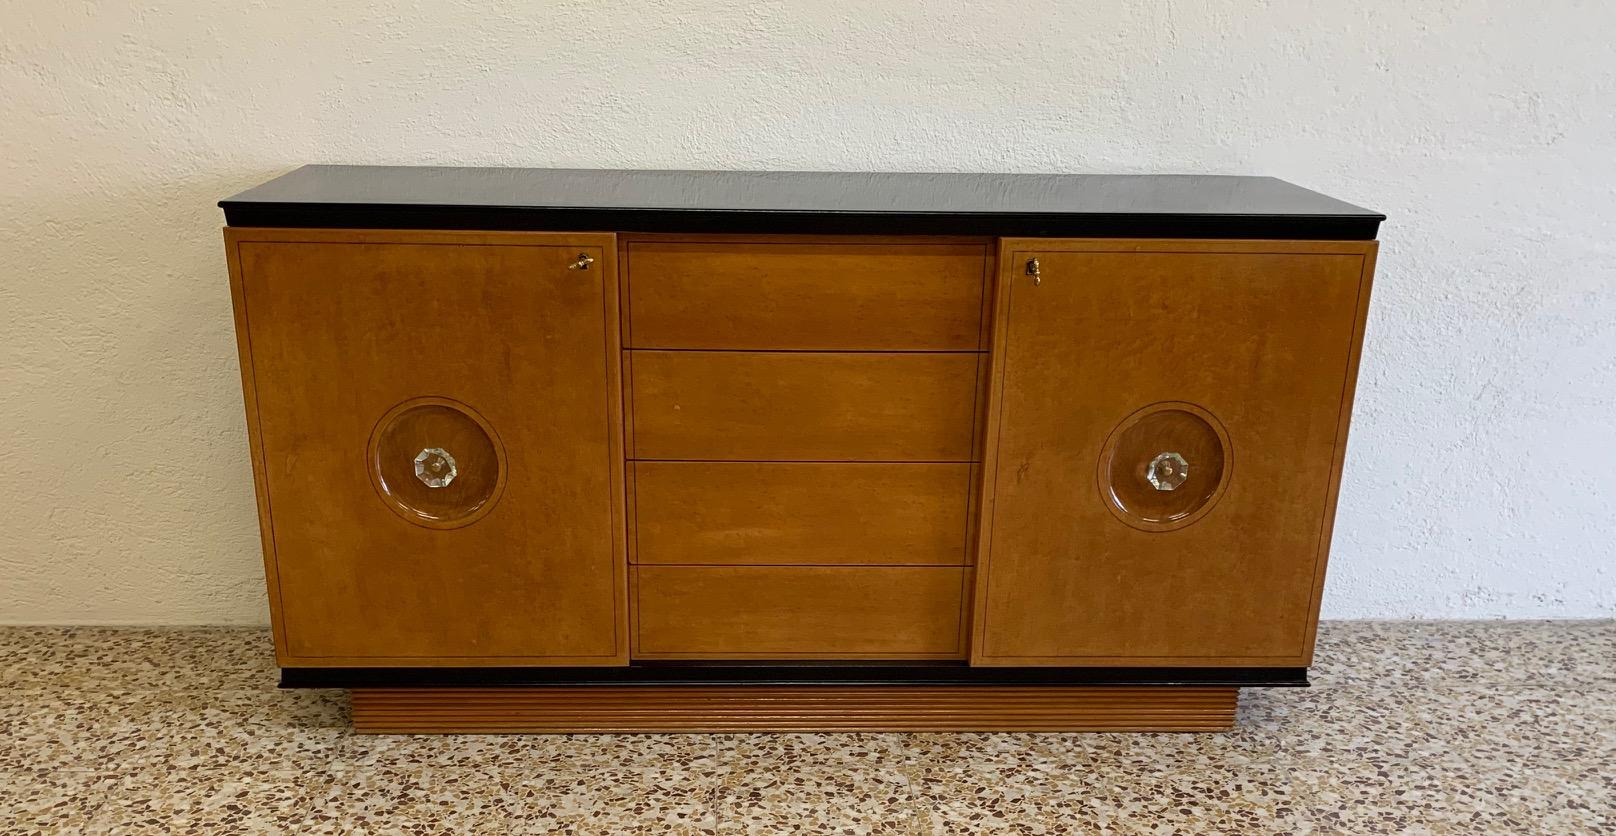 This Art Deco dresser was produced in Italy in the 1940s.
The front and the profiles are in maple while the structure is finely black lacquered.
The original handles are in glass and brass.
The elegant walnut interior has four drawers and two